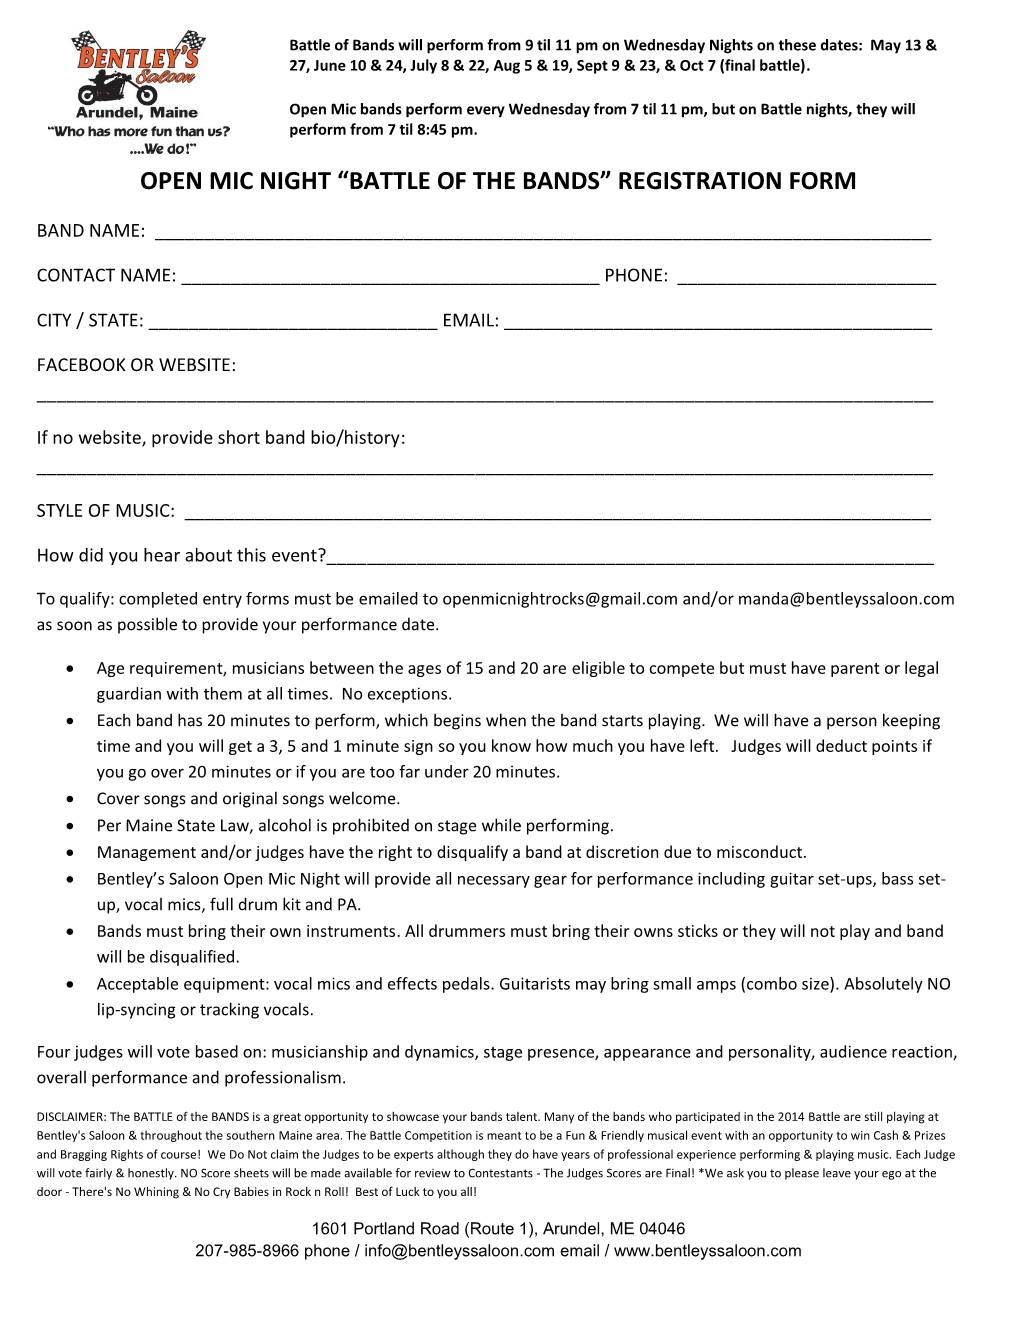 Open Mic Night “Battle of the Bands” Registration Form